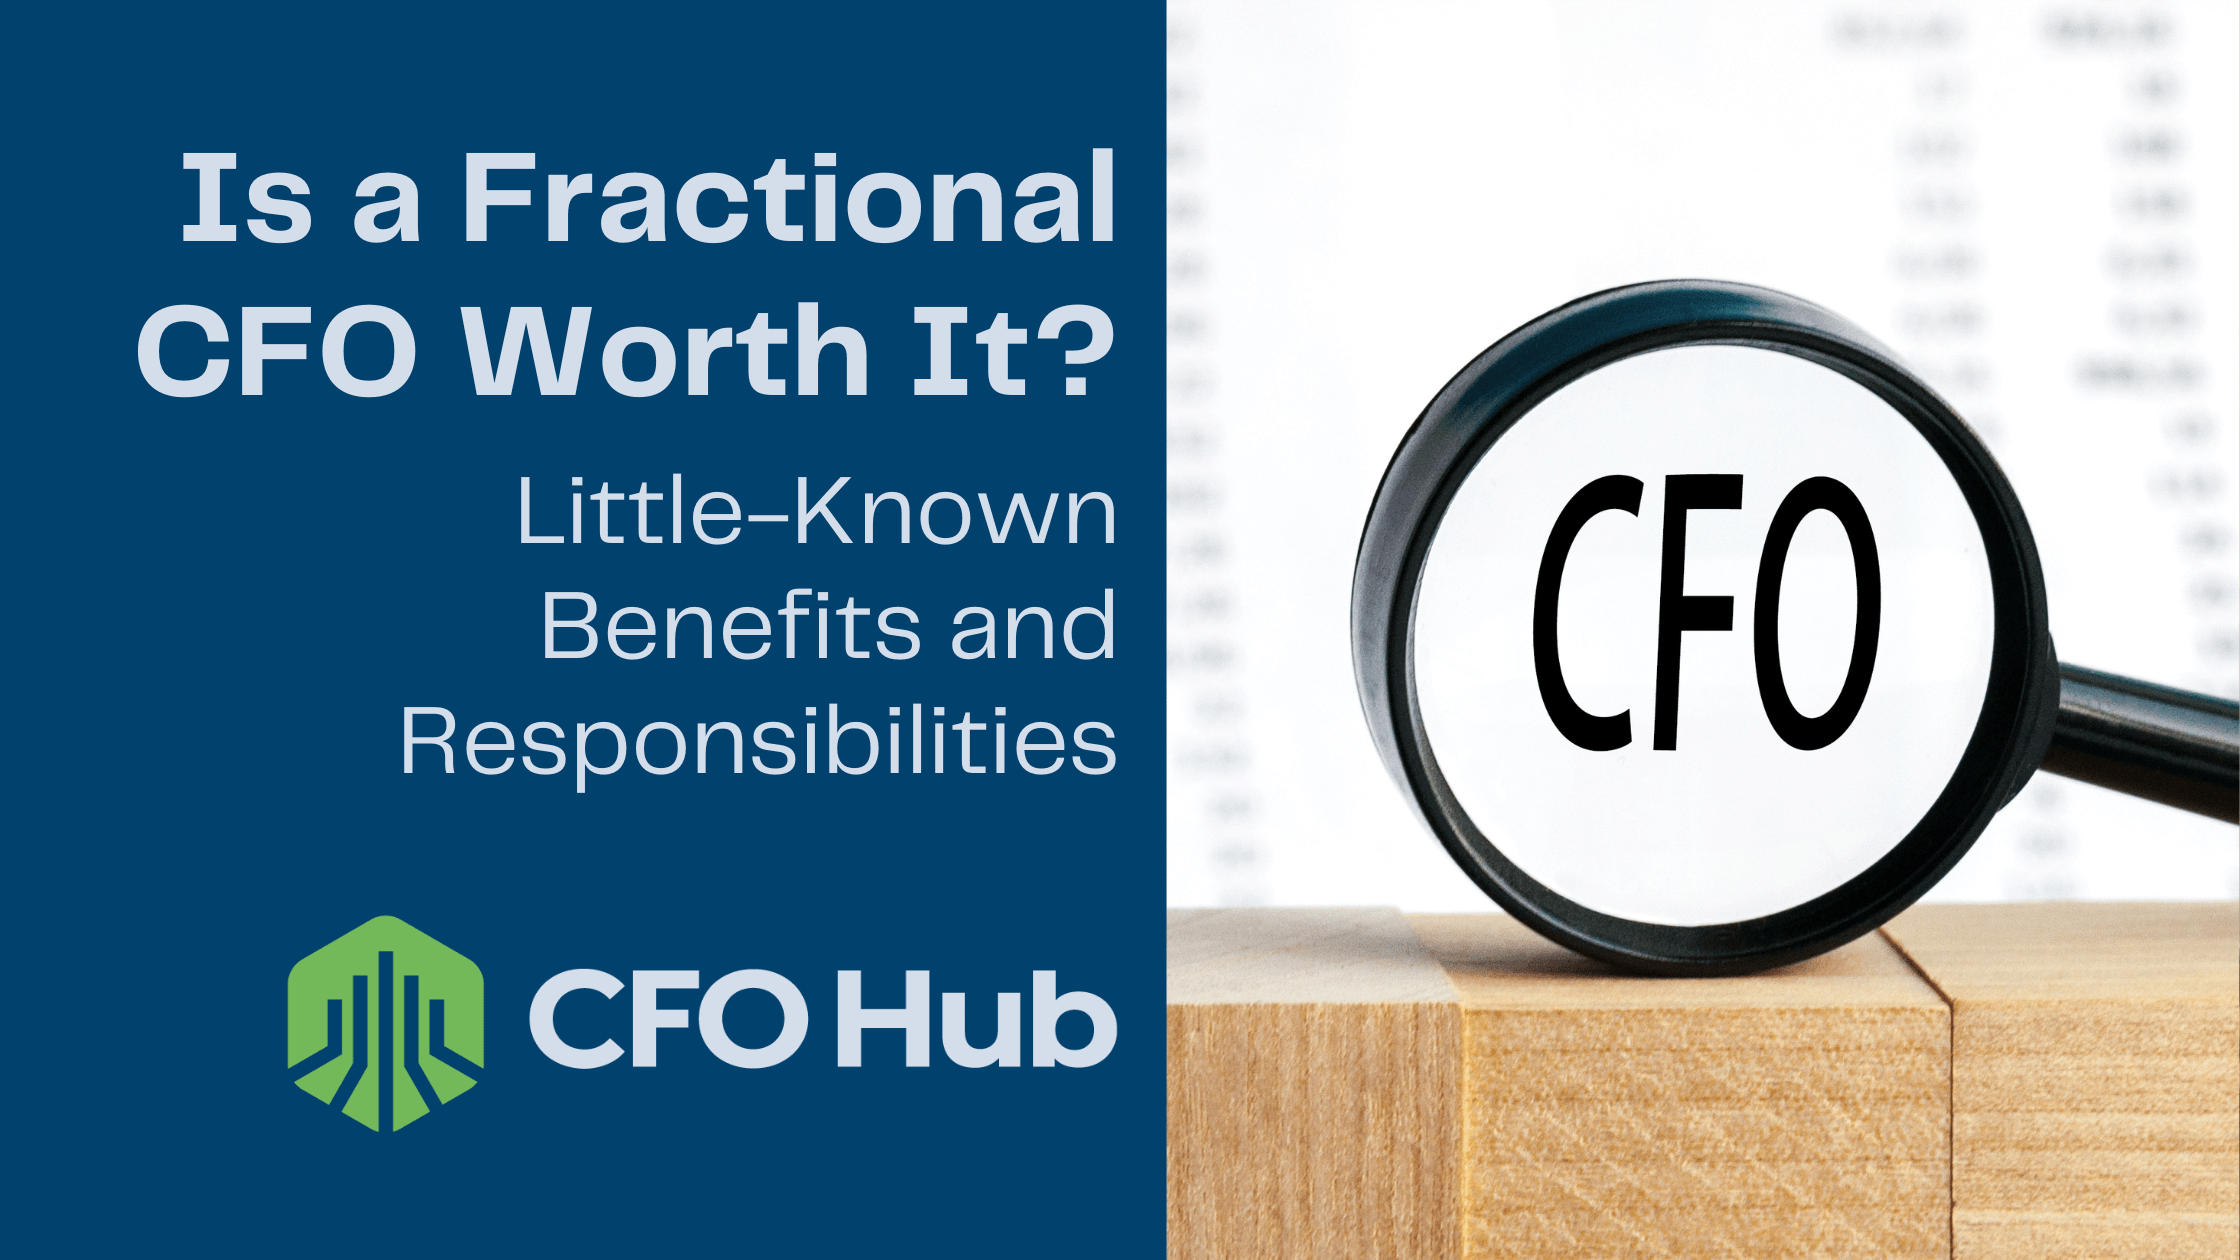 An image with the text "Is a Fractional CFO Worth It? Little-Known Benefits and Responsibilities" on the left side, next to a magnifying glass focusing on the letters "CFO" on the right side, and a logo with the text "CFO Hub" at the bottom left corner.